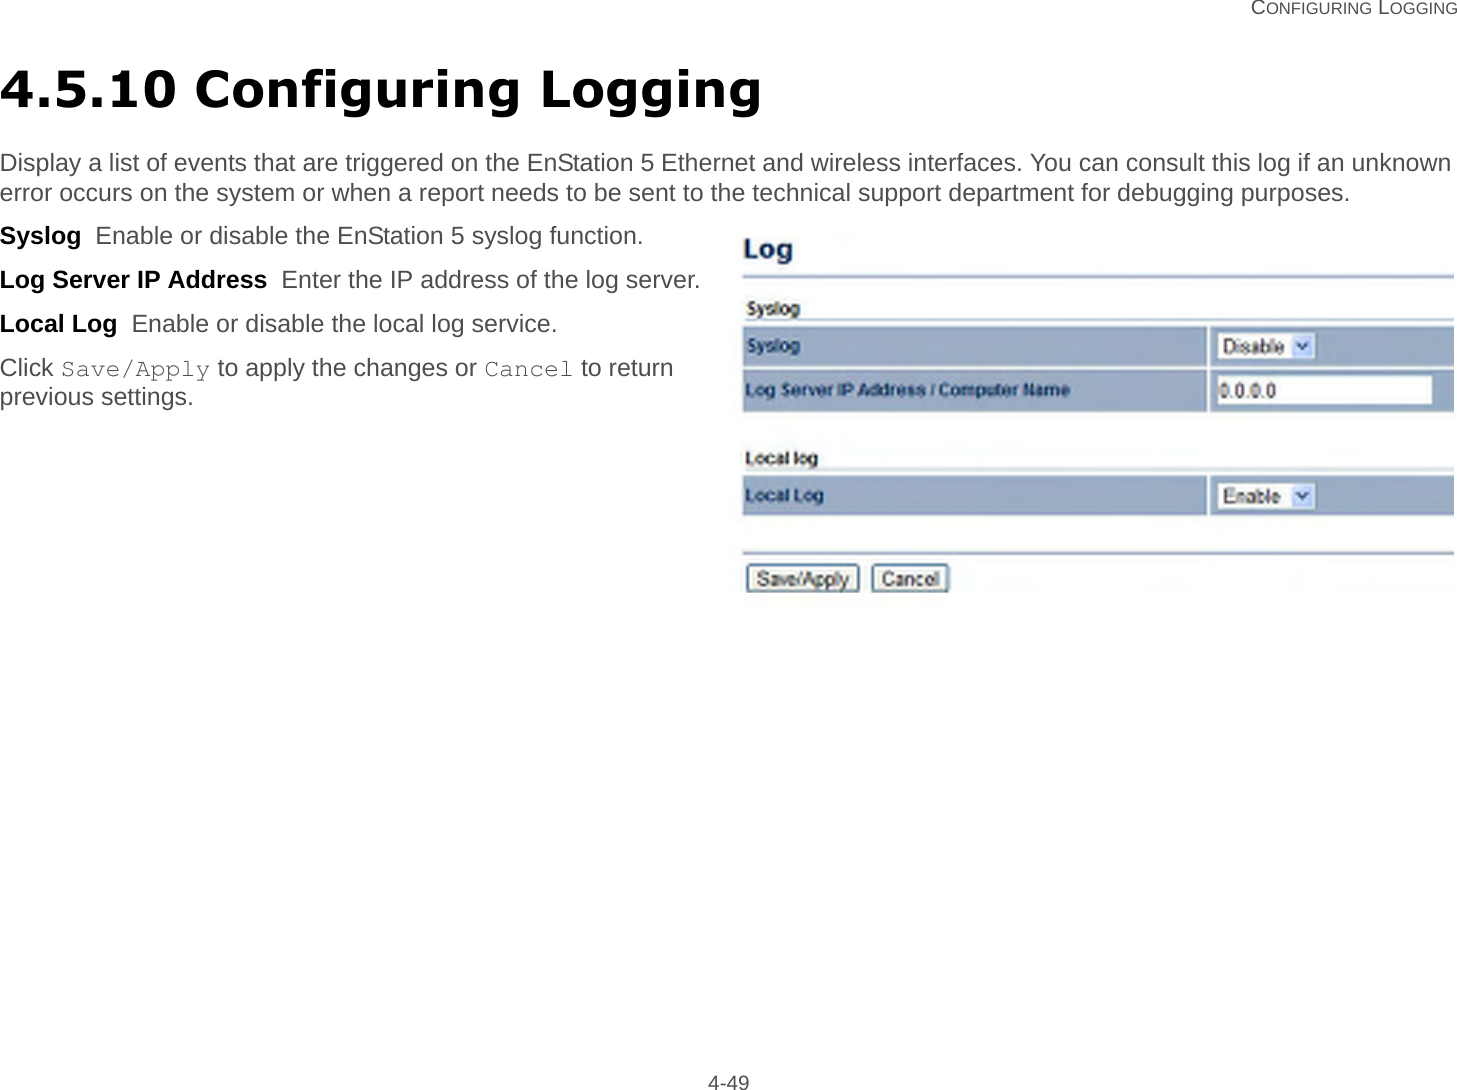   CONFIGURING LOGGING 4-494.5.10 Configuring LoggingDisplay a list of events that are triggered on the EnStation 5 Ethernet and wireless interfaces. You can consult this log if an unknown error occurs on the system or when a report needs to be sent to the technical support department for debugging purposes.Syslog  Enable or disable the EnStation 5 syslog function.Log Server IP Address  Enter the IP address of the log server.Local Log  Enable or disable the local log service.Click Save/Apply to apply the changes or Cancel to return previous settings.